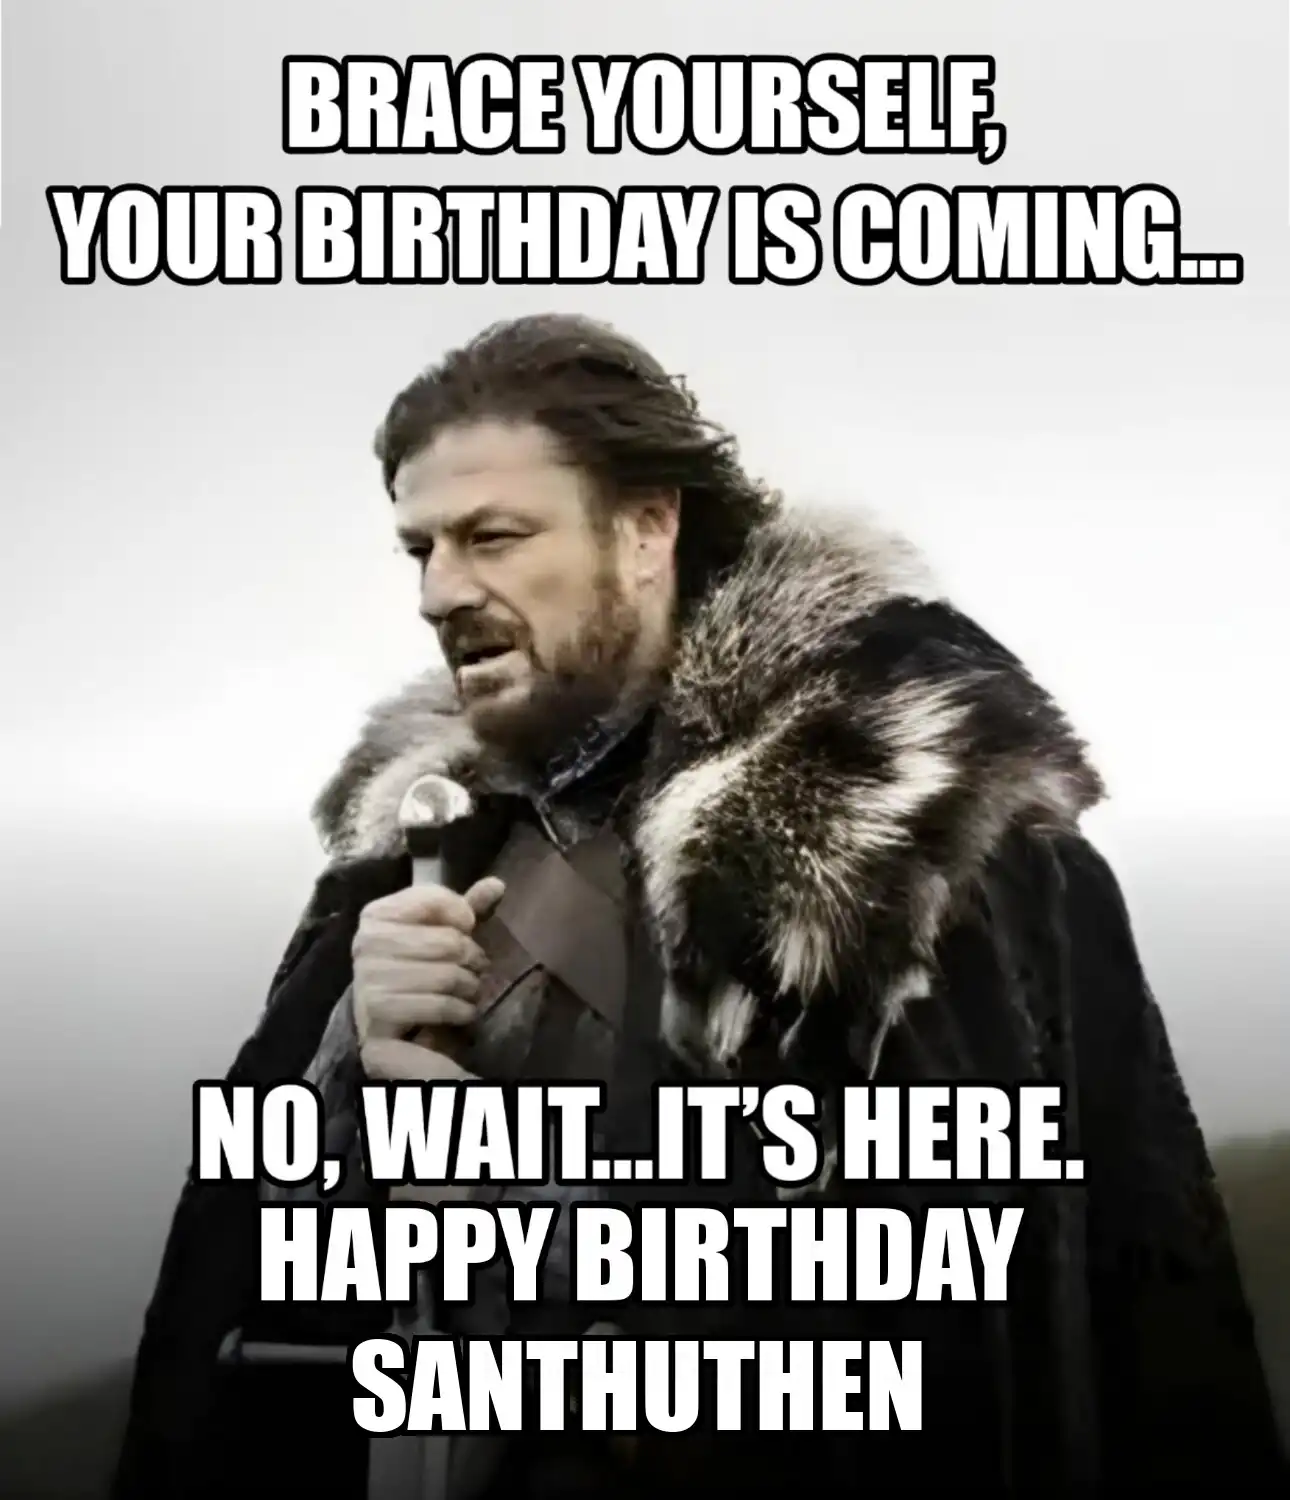 Happy Birthday Santhuthen Brace Yourself Your Birthday Is Coming Meme